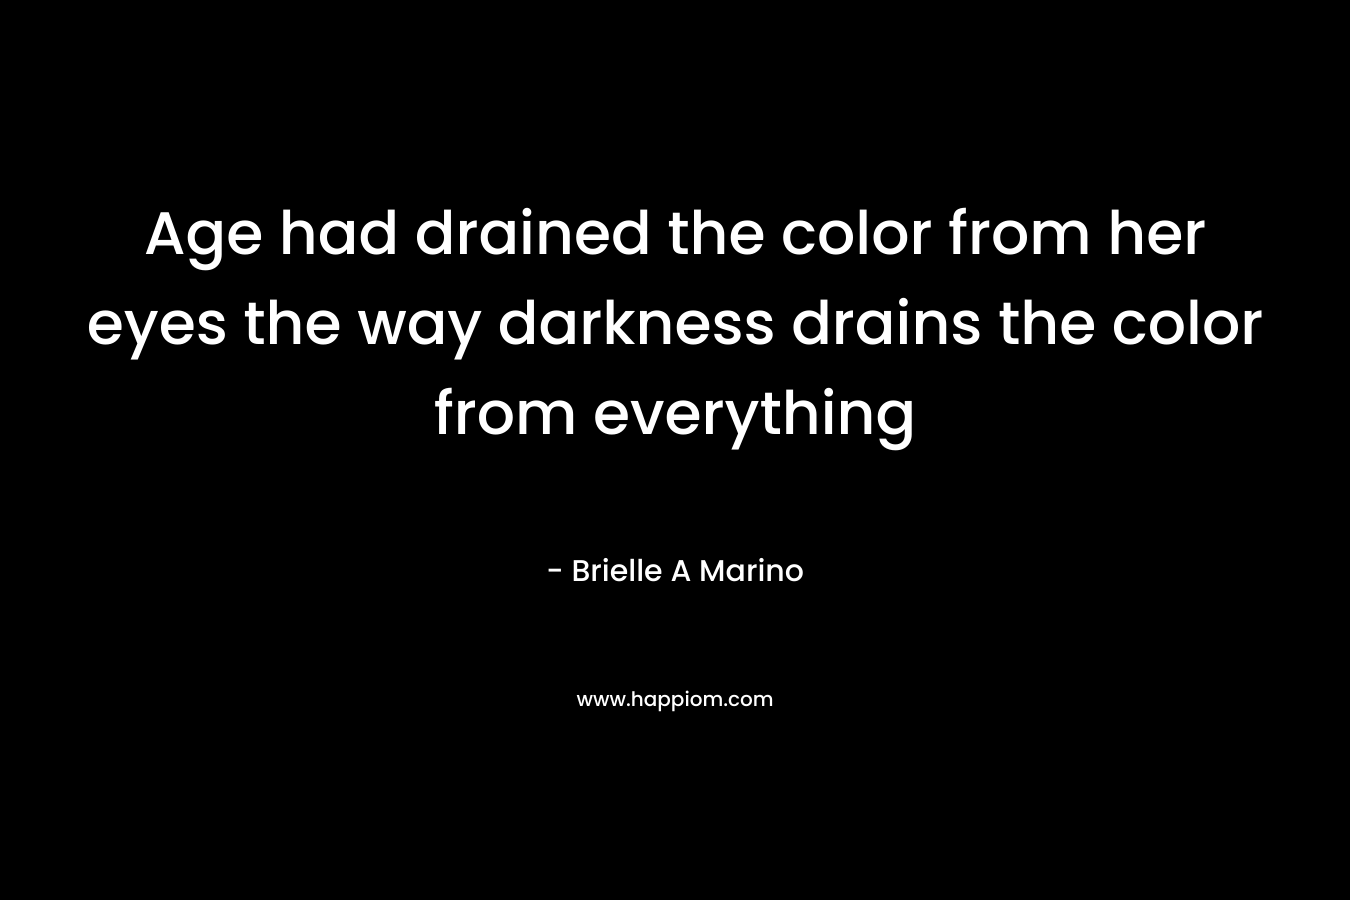 Age had drained the color from her eyes the way darkness drains the color from everything